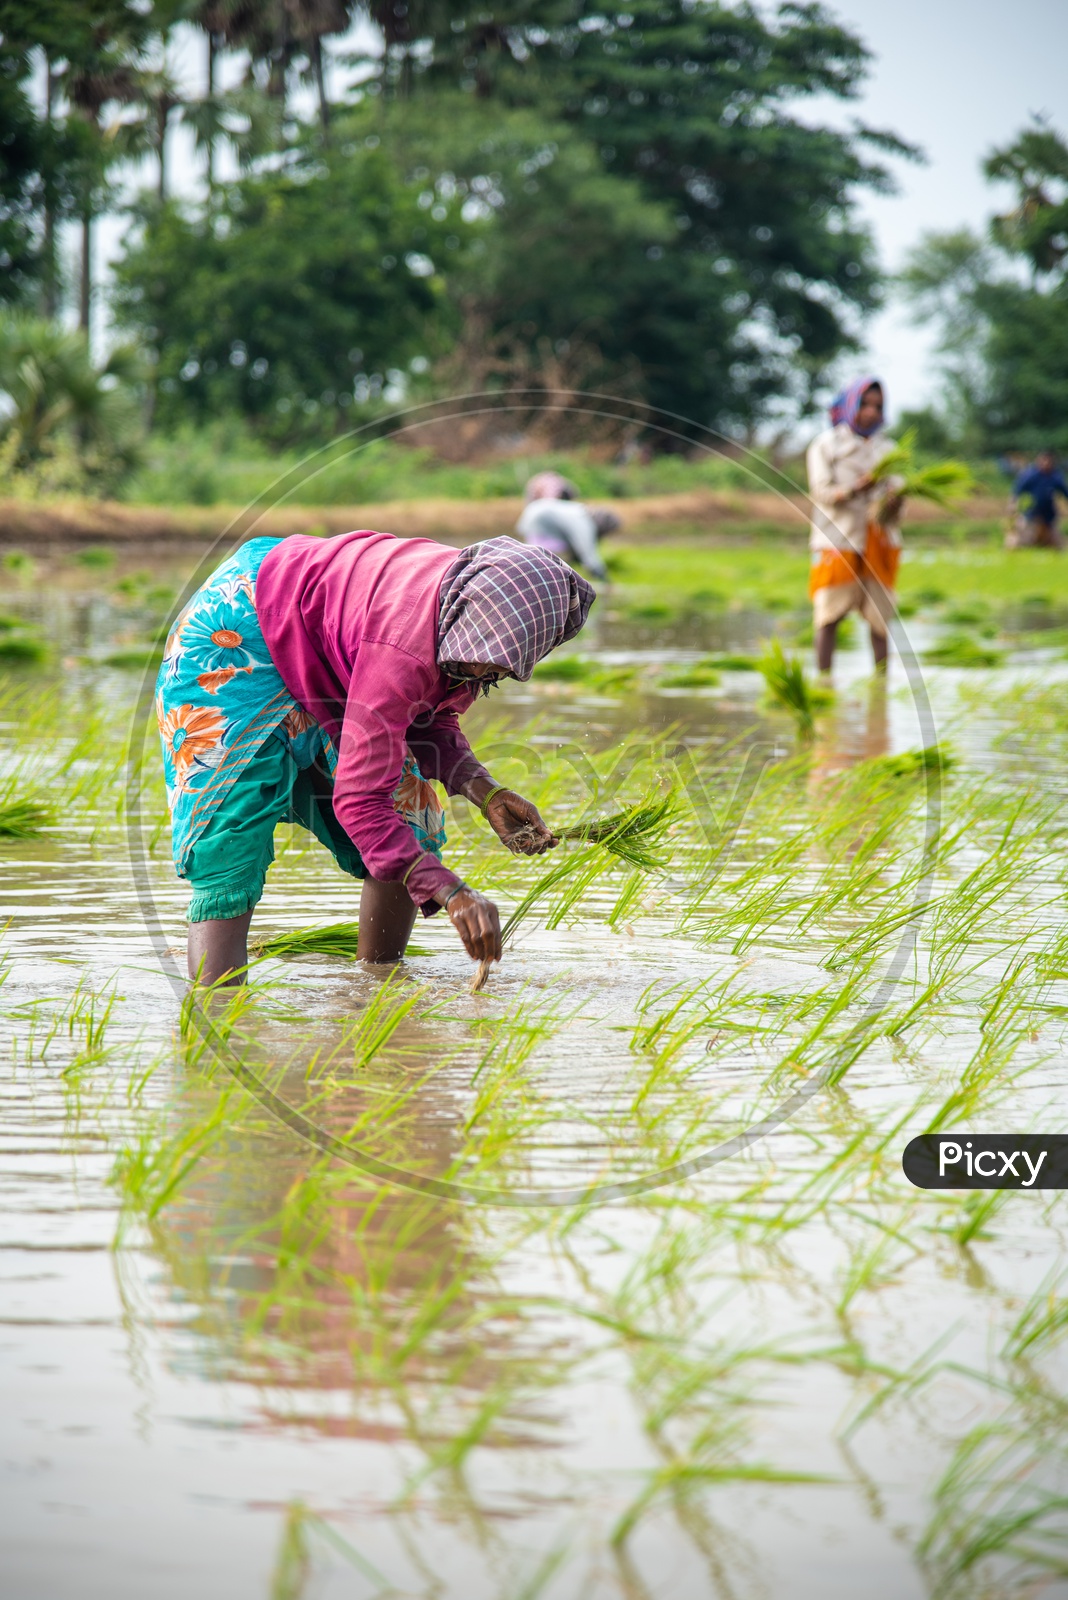 Woman planting Paddy Saplings  in a Paddy Crop